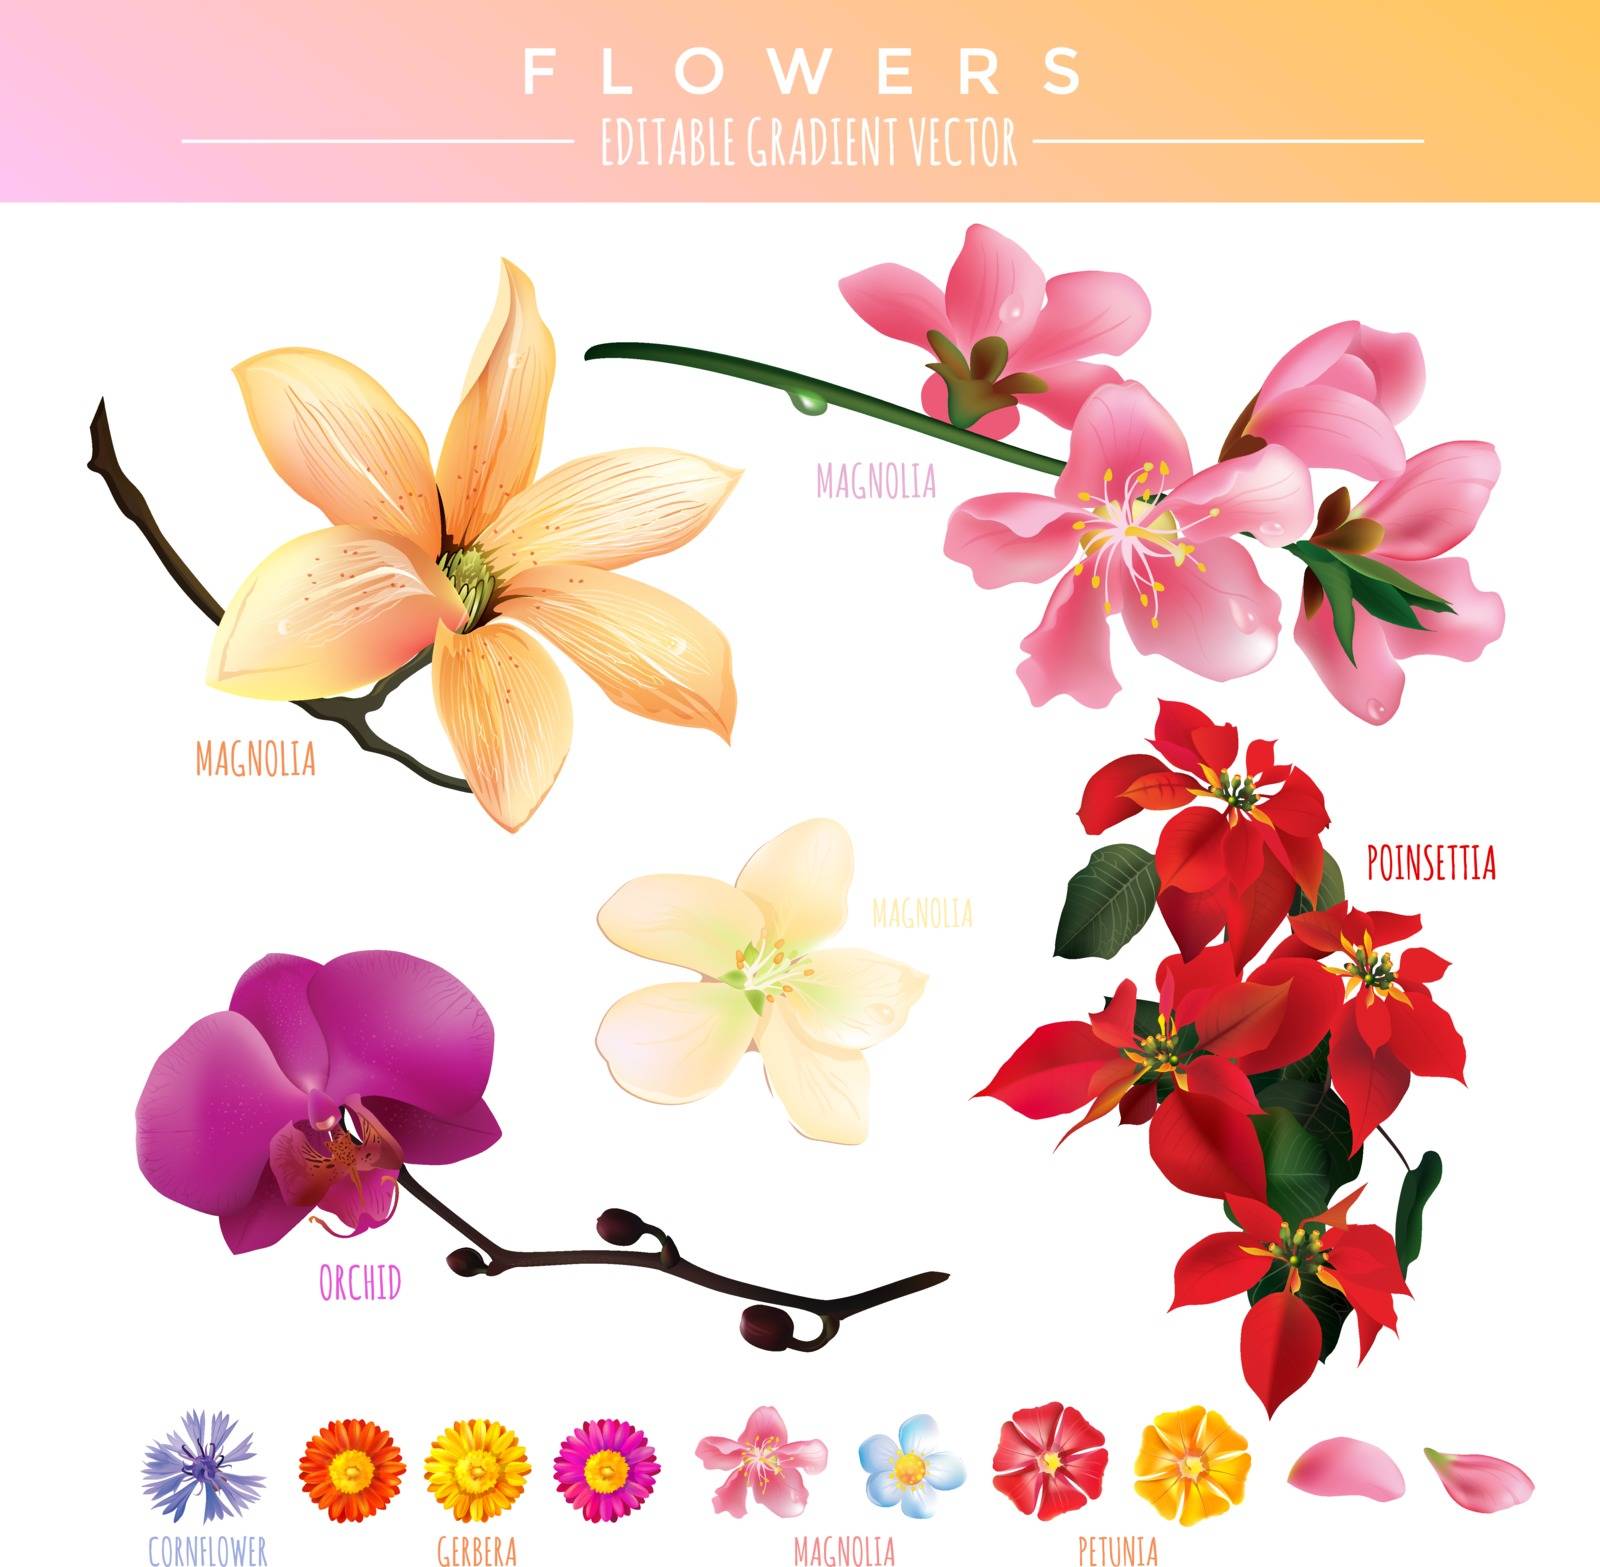 Flowers Editable Gradient Vector by ConceptCafe